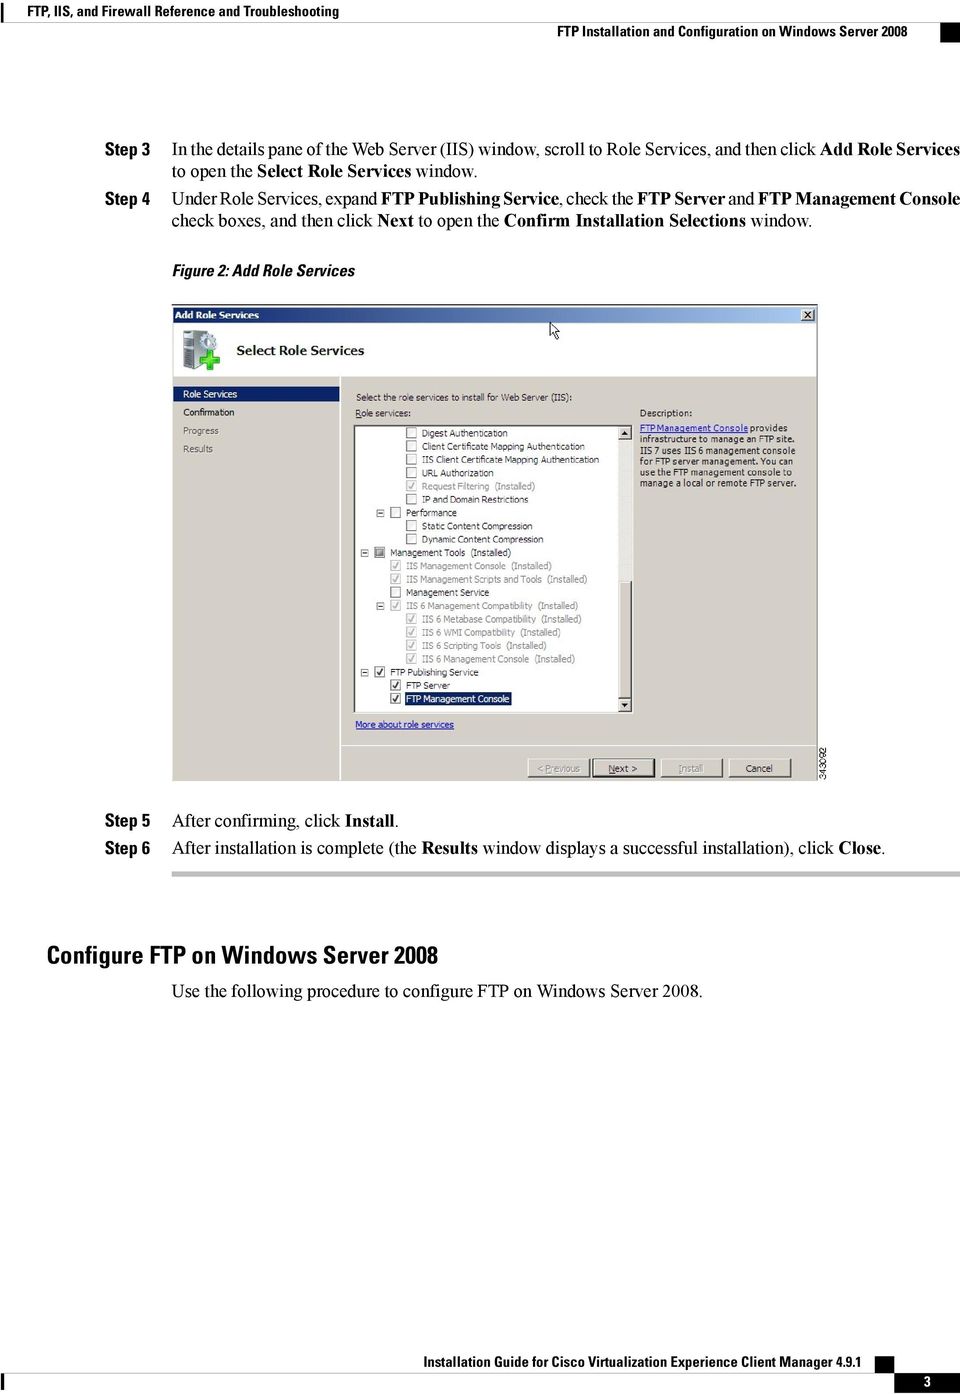 Under Role Services, expand FTP Publishing Service, check the FTP Server and FTP Management Console check boxes, and then click Next to open the Confirm Installation Selections window.